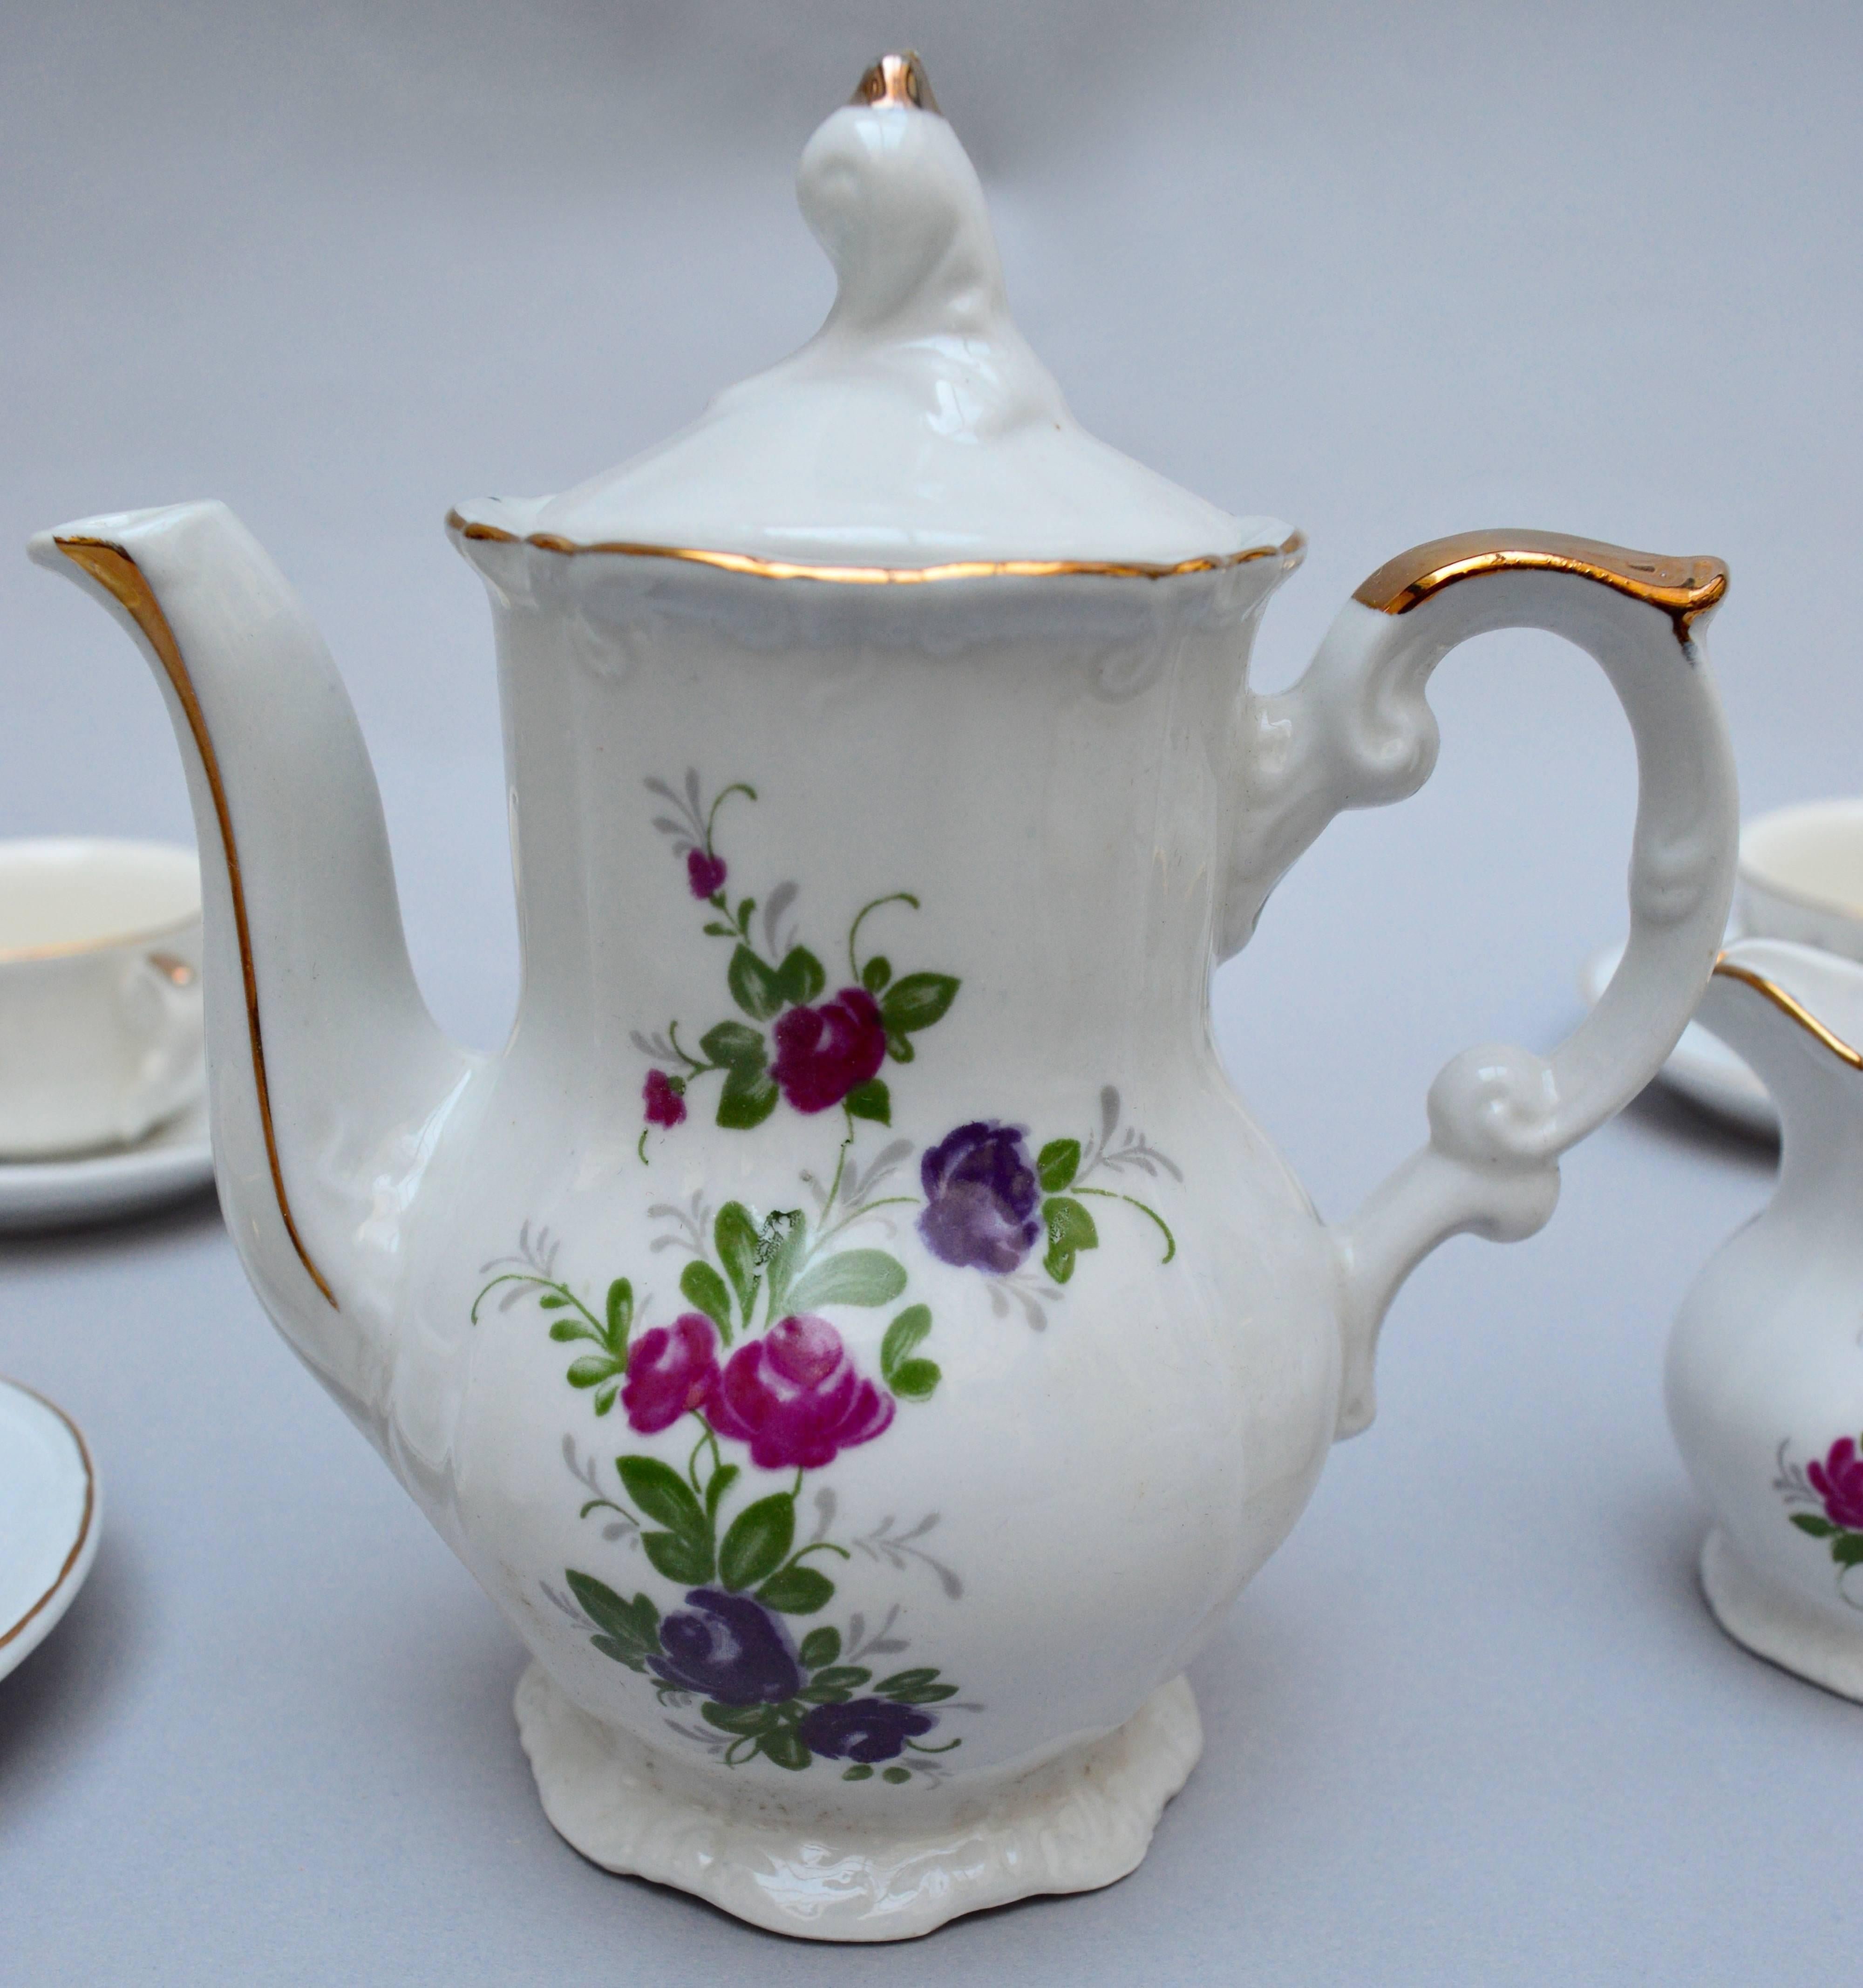 A child size French porcelain tea set in excellent condition,
Rare to find and so elegant for the Mademoiselle in your life.
11 piece set consist of:
One tea pot with lid.
One creamer.
One sugar pot with lid.
Four tea cups.
Four saucers.
the